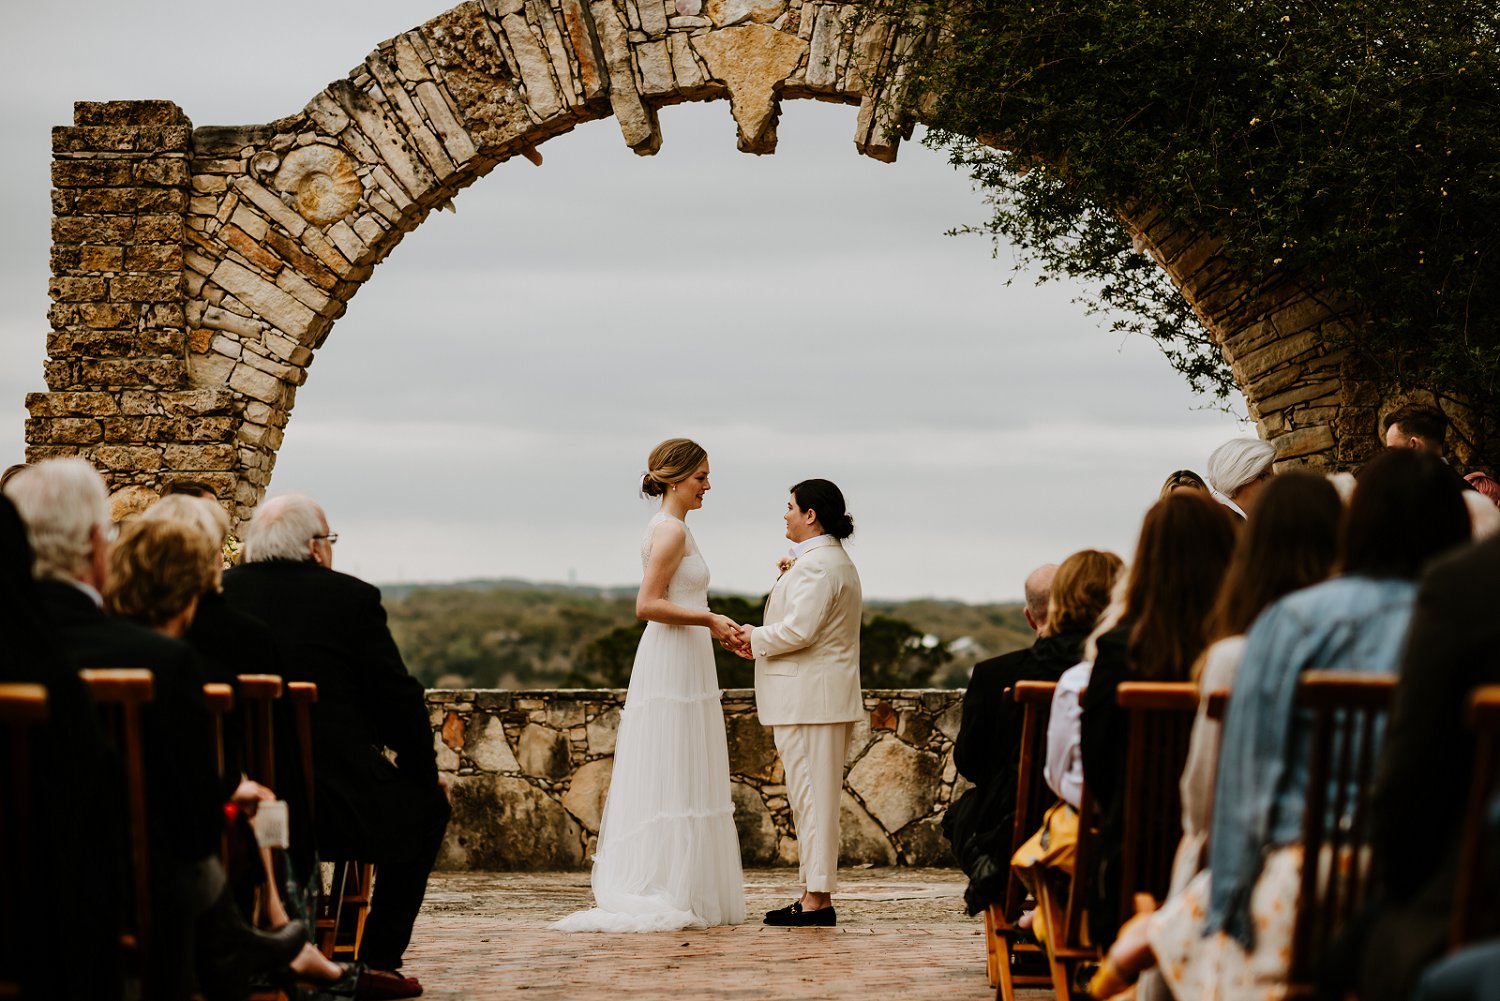 camp lucy dripping springs wedding